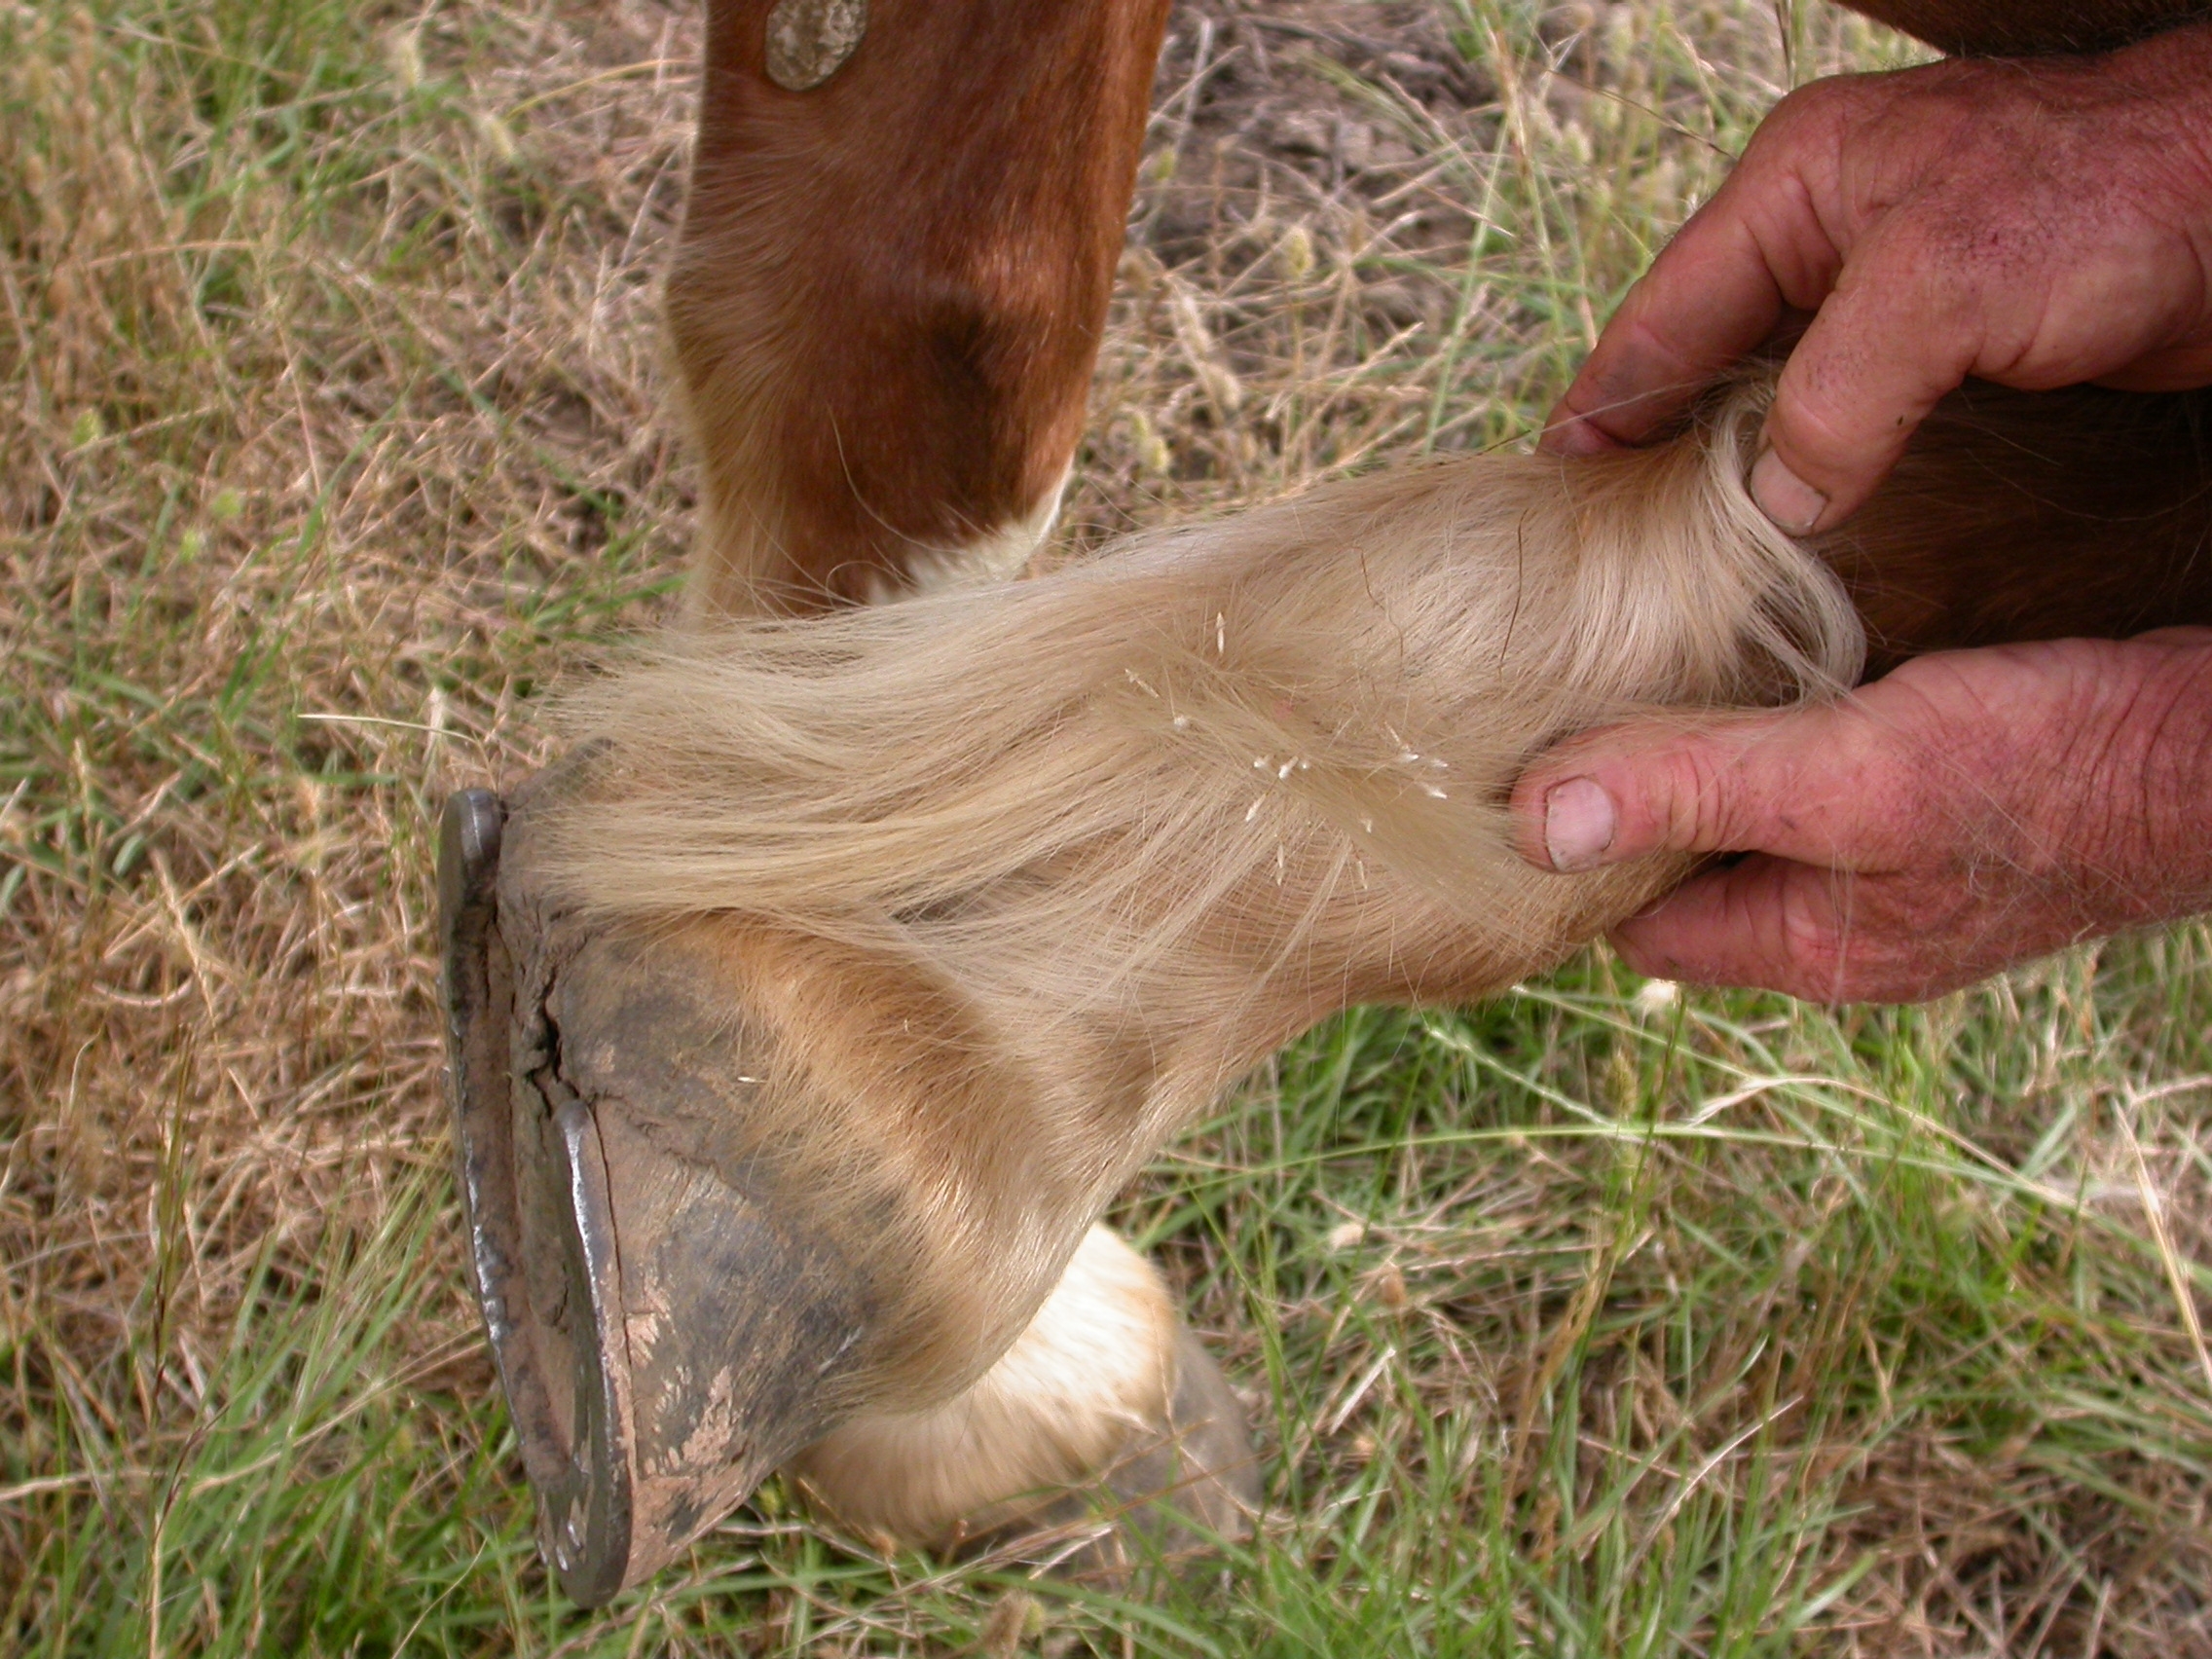 CNG seed attached to animal hoof hair